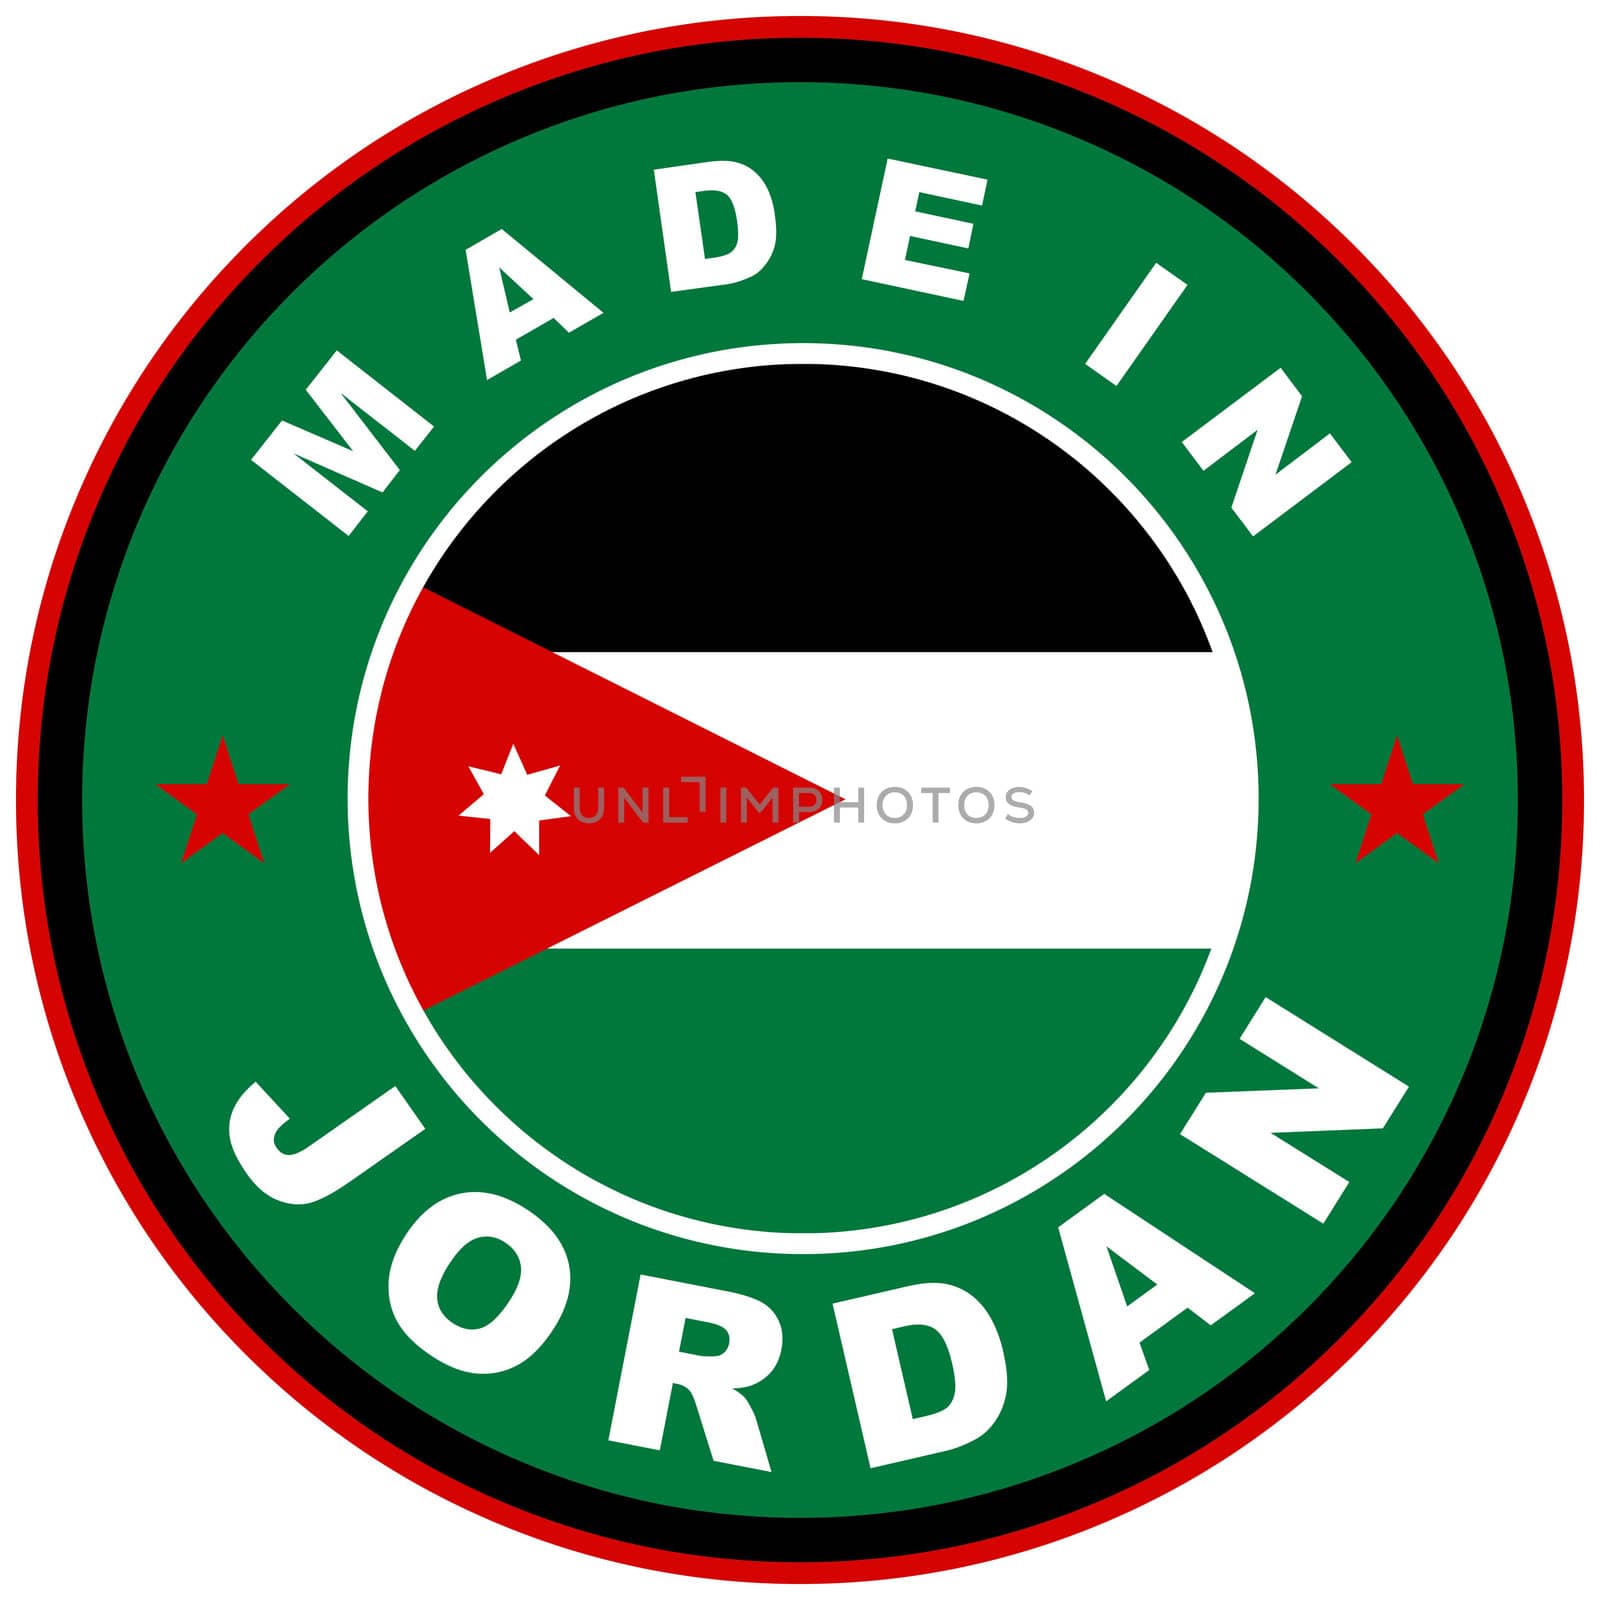 very big size made in jordan country label